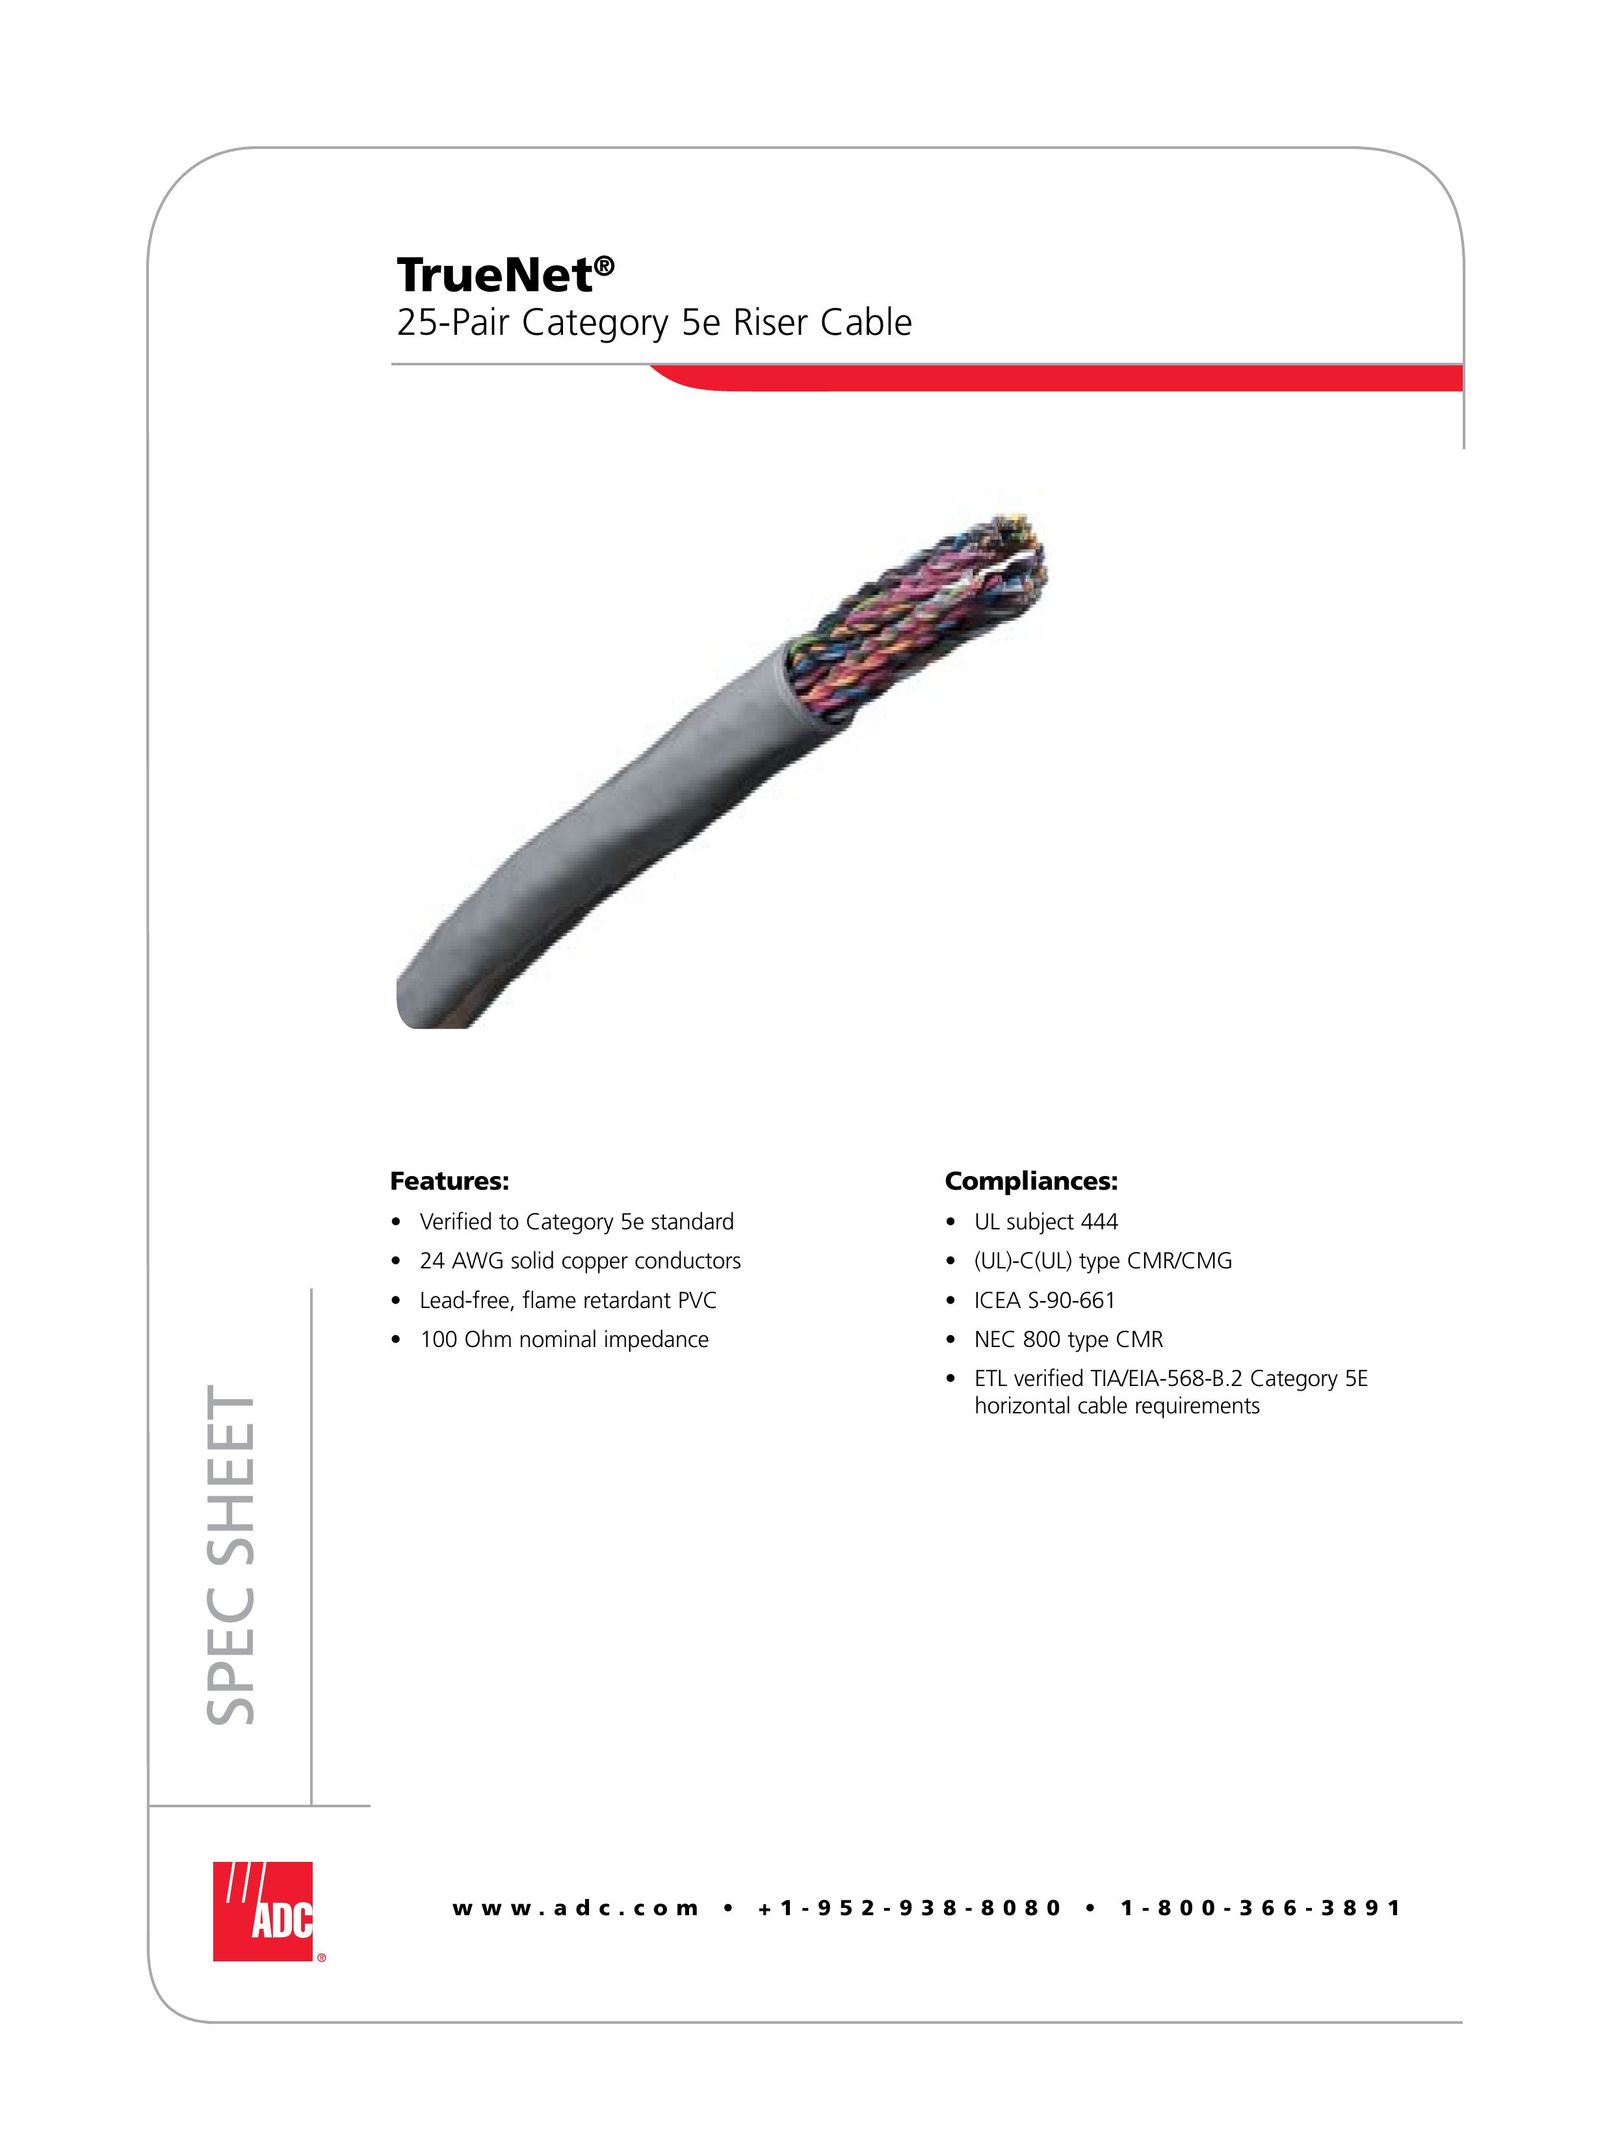 ADC 25-Pair Category 5e Riser Cable Network Router User Manual